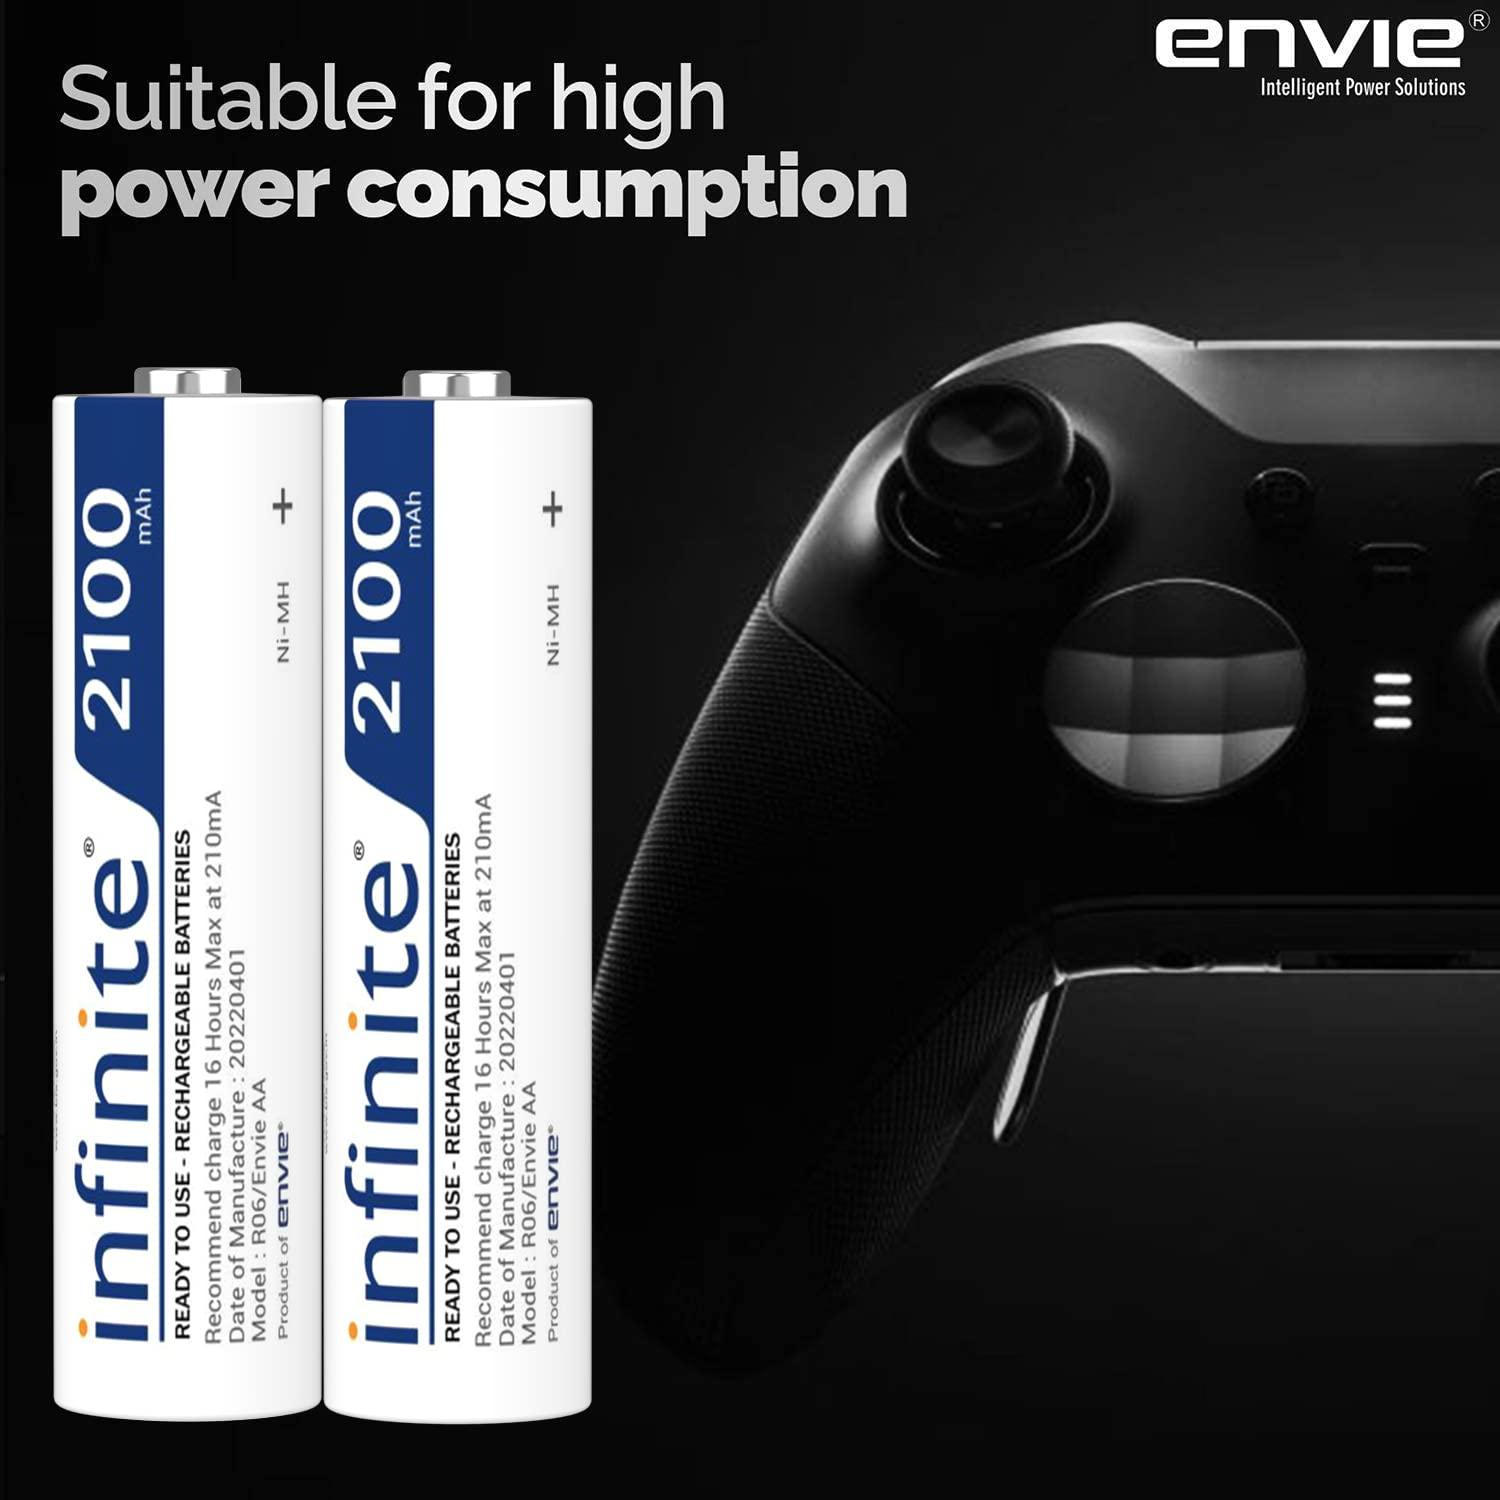 ENVIE (AA 2100 2PL) Infinite Rechargeable Battery for Remote Controls, Electronic Toys, Cameras, Flashlights and Others - Digitek